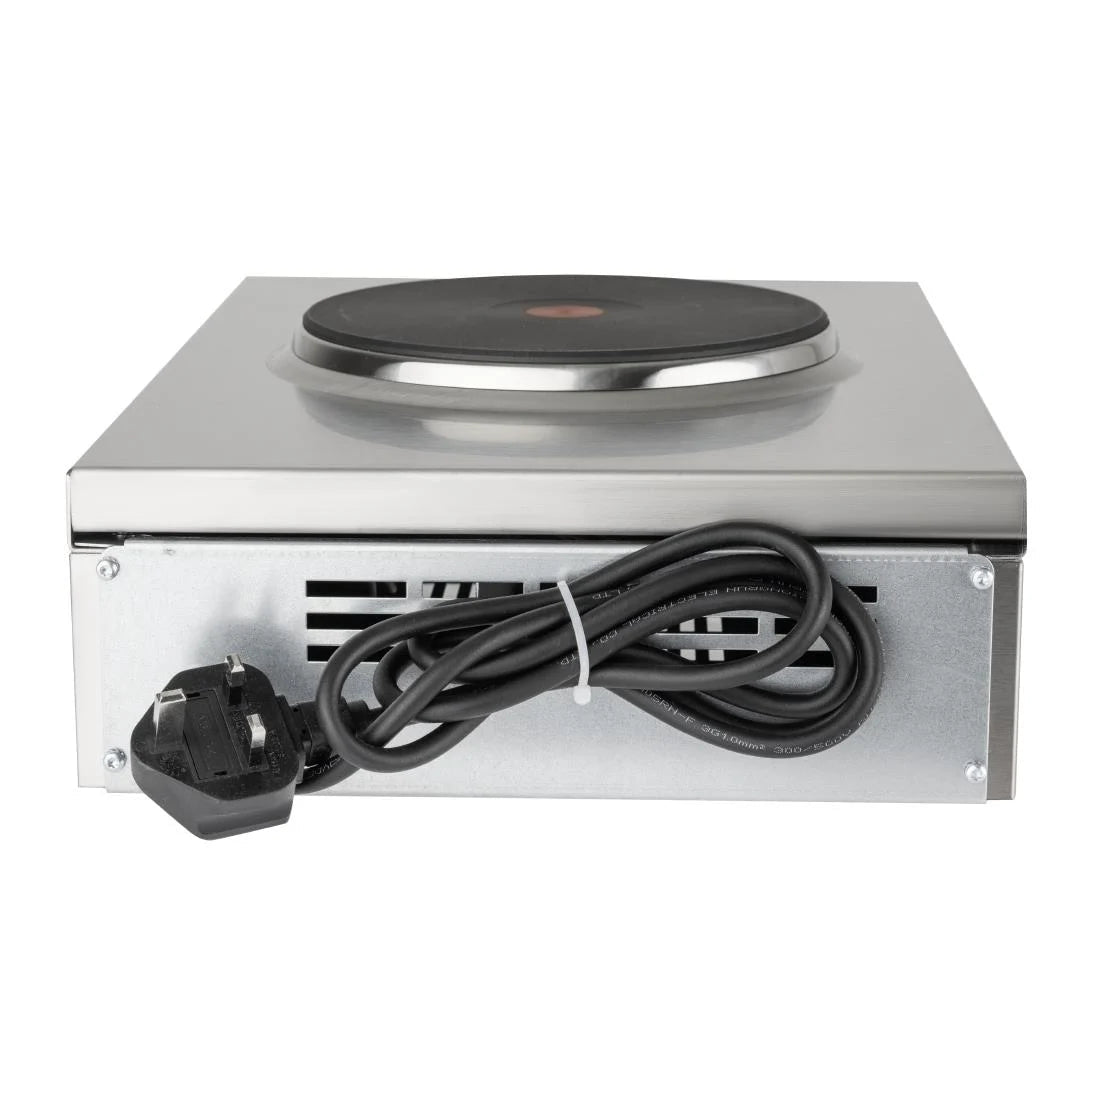 LBR - Lincat Lynx 400 Electric Counter-top Boiling Top - Single Plate - W 285 mm - 2.0 kW CB999 JD Catering Equipment Solutions Ltd